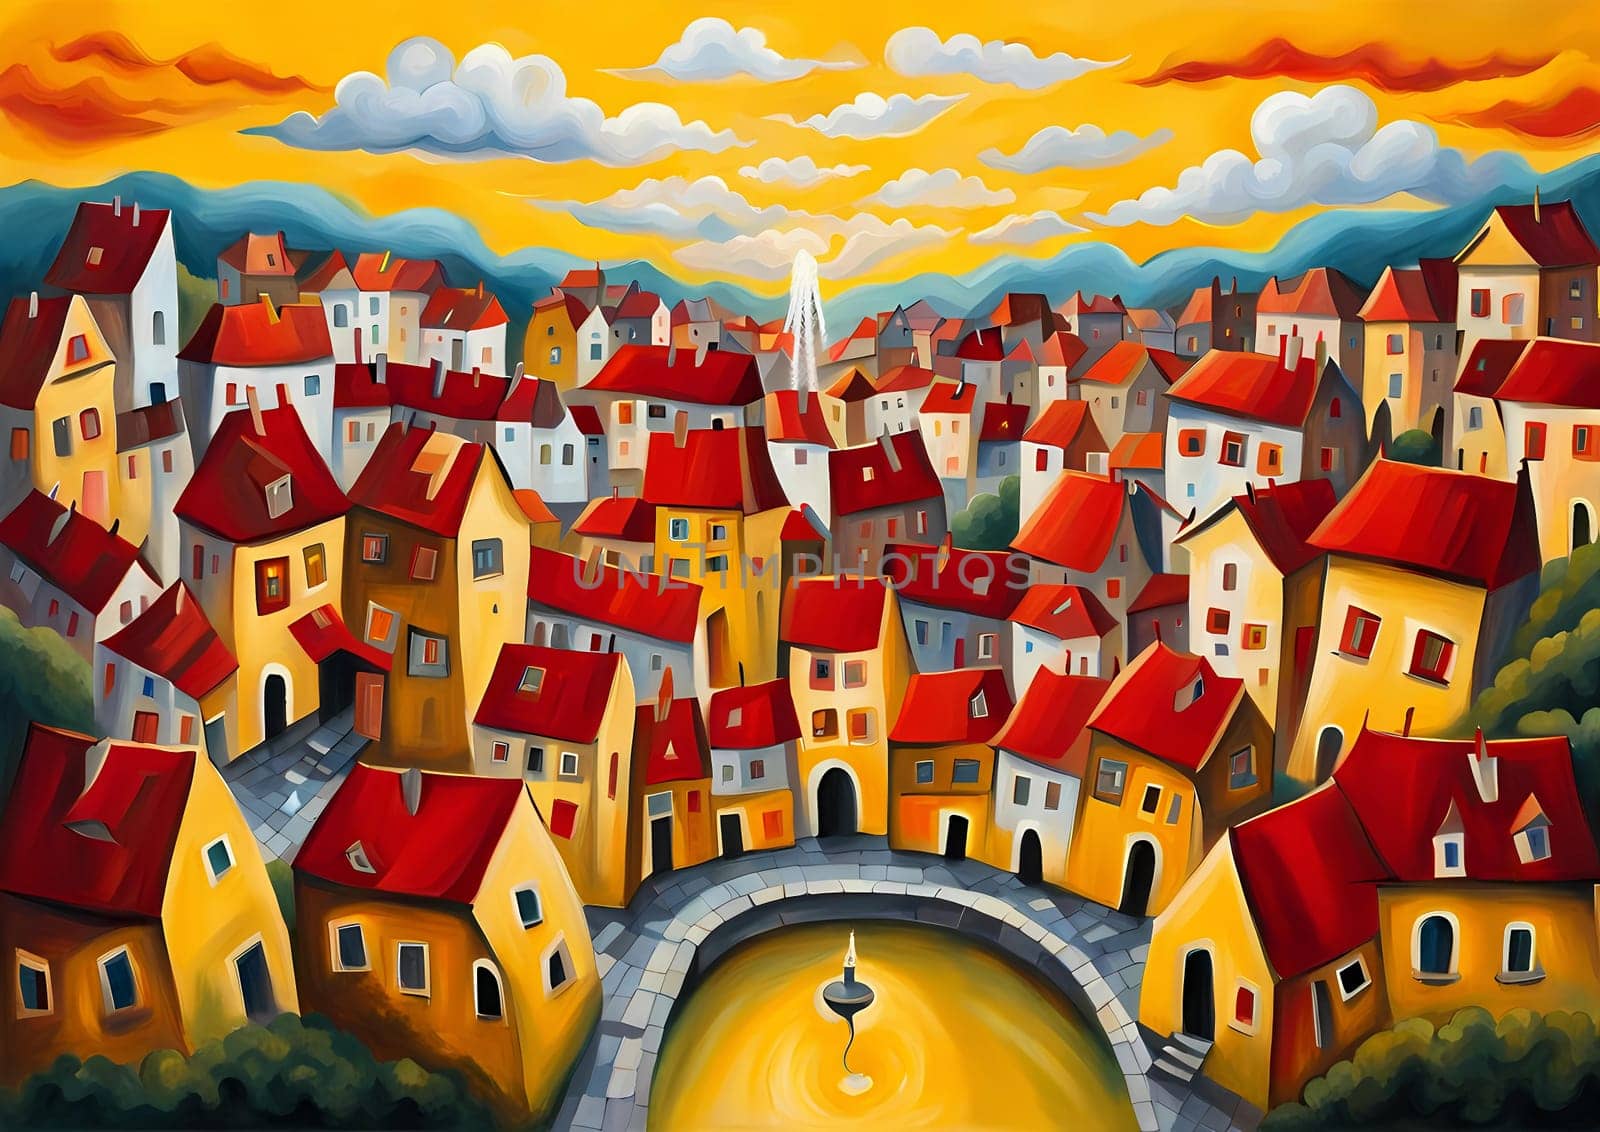 painting of a city with a fountain and clouds in the sky, dawn, transylvanian folk art, yellow and red, connectedness, maybe a fairy tale, houses on stilts, a tiny village, Generative AI